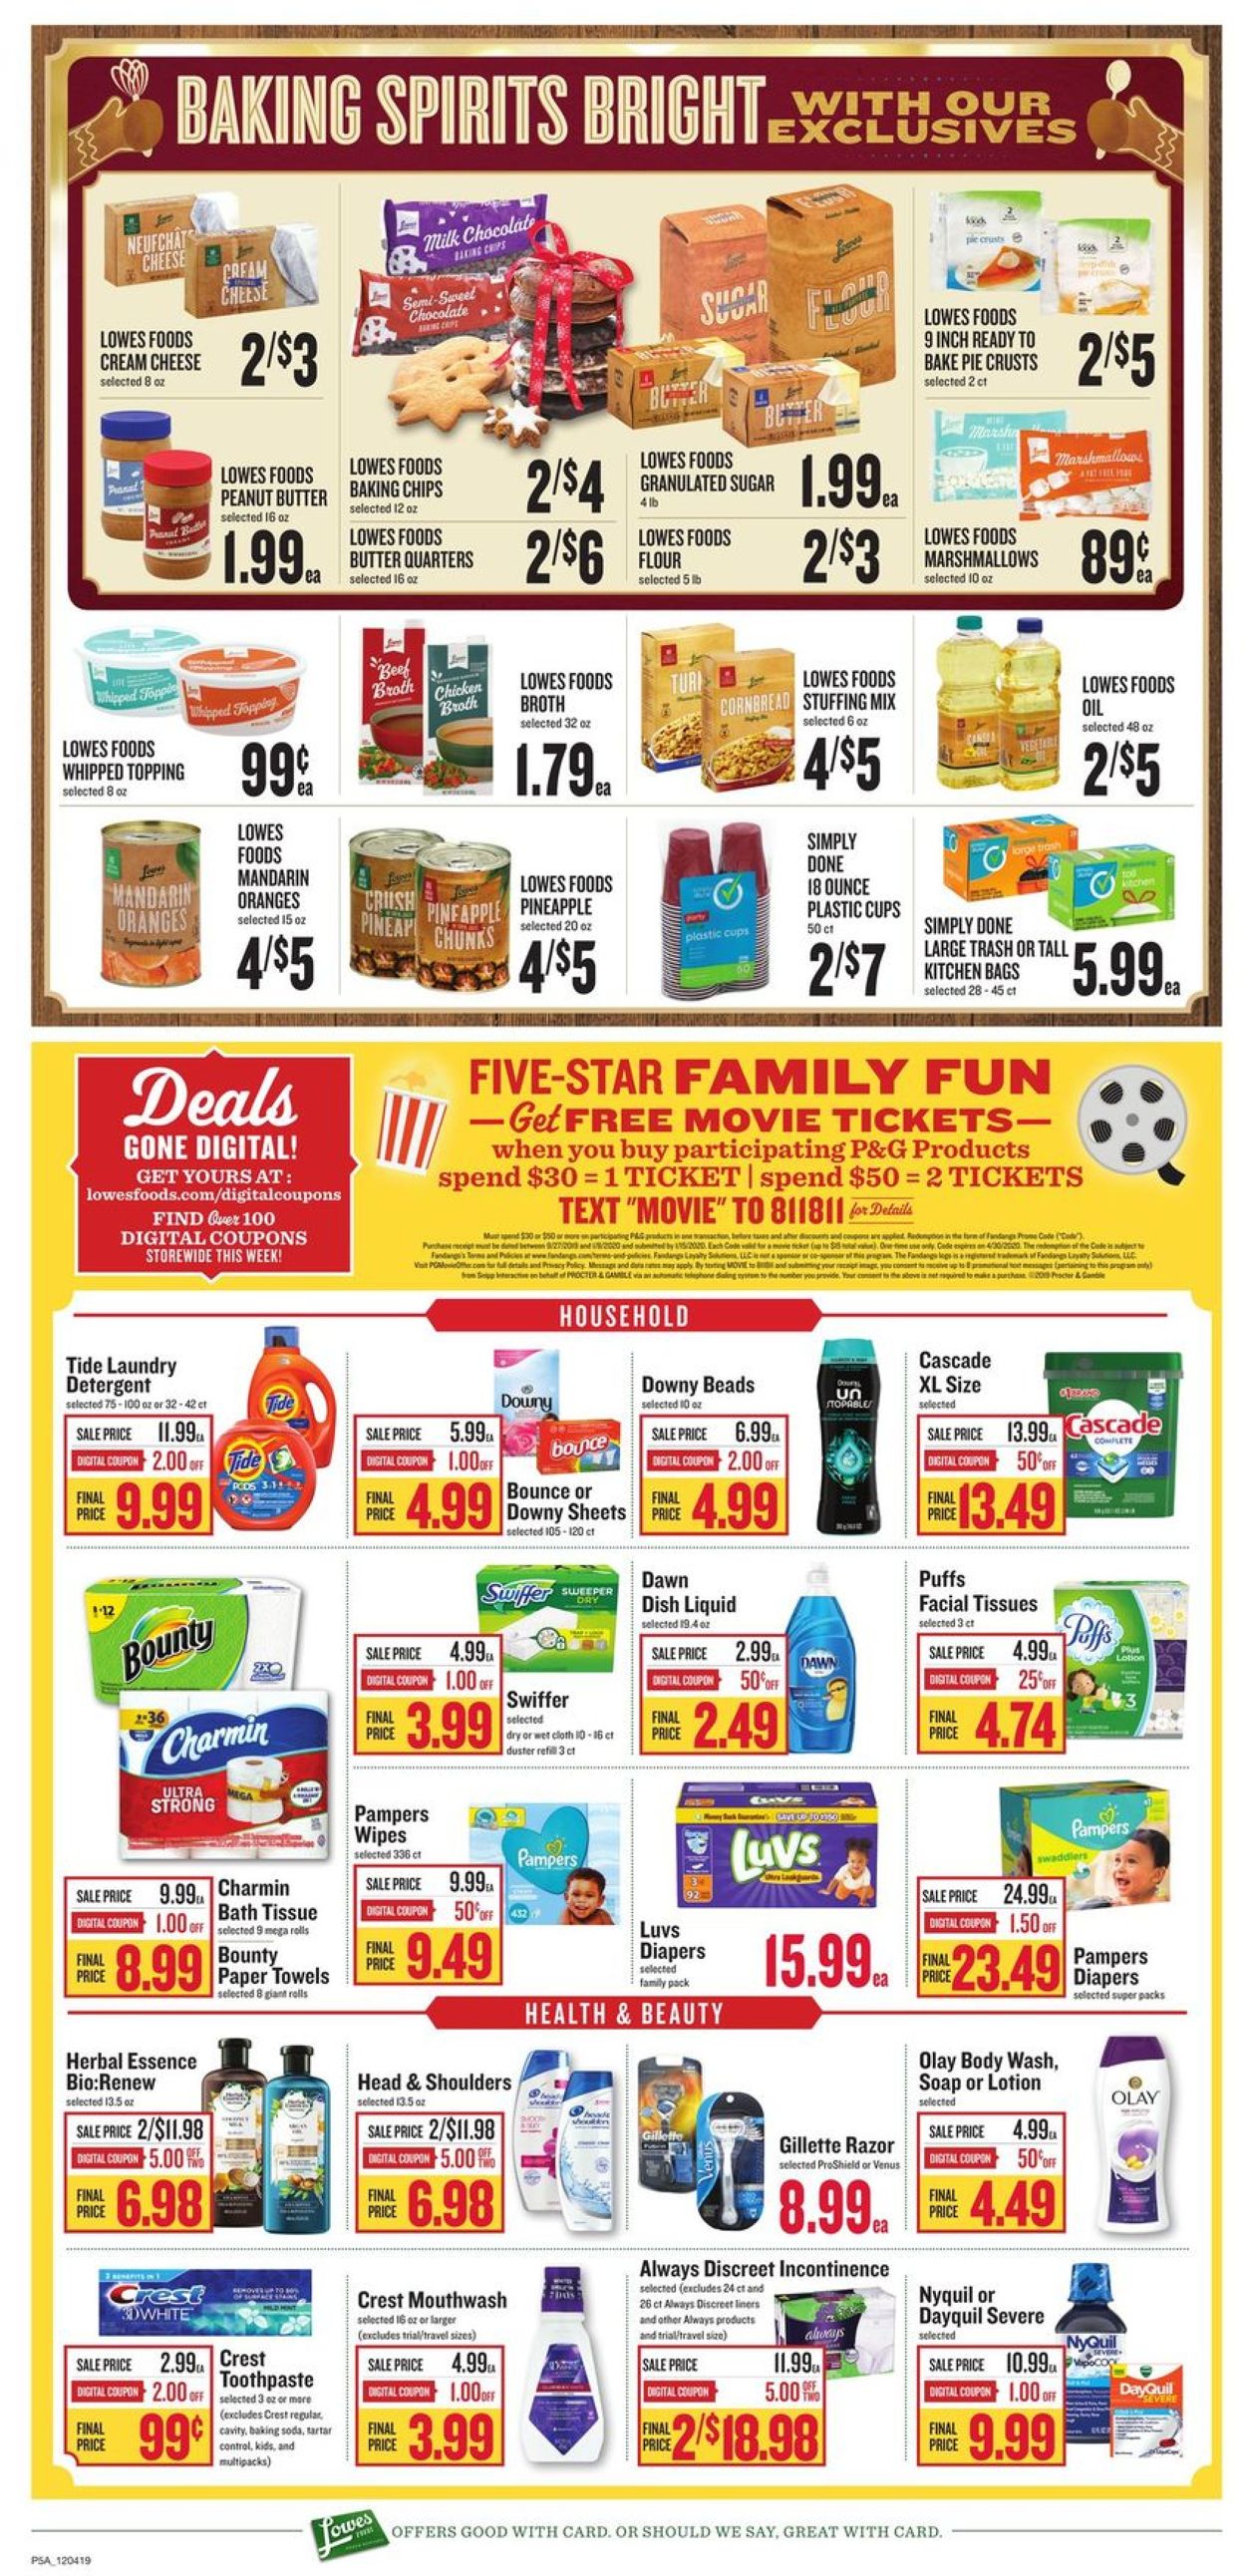 Lowes Foods - Holidays Ad 2019 Weekly Ad Circular - valid 12/04-12/10/2019 (Page 9)